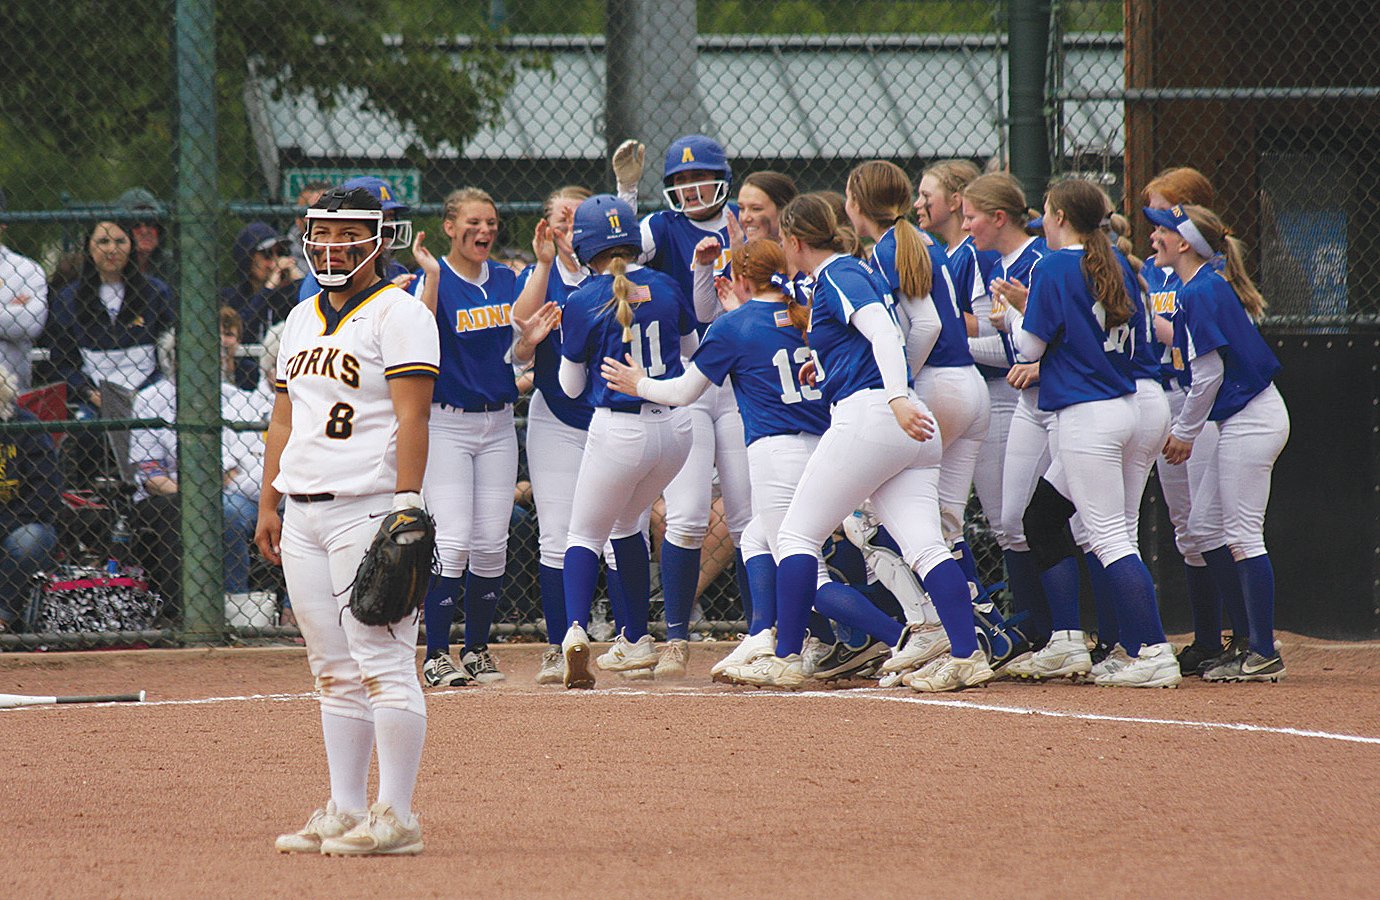 Adna players celebrate a home run from Danika Hallom (11) during a win over Forks on Friday during the 2B state softball tournament in Yakima.